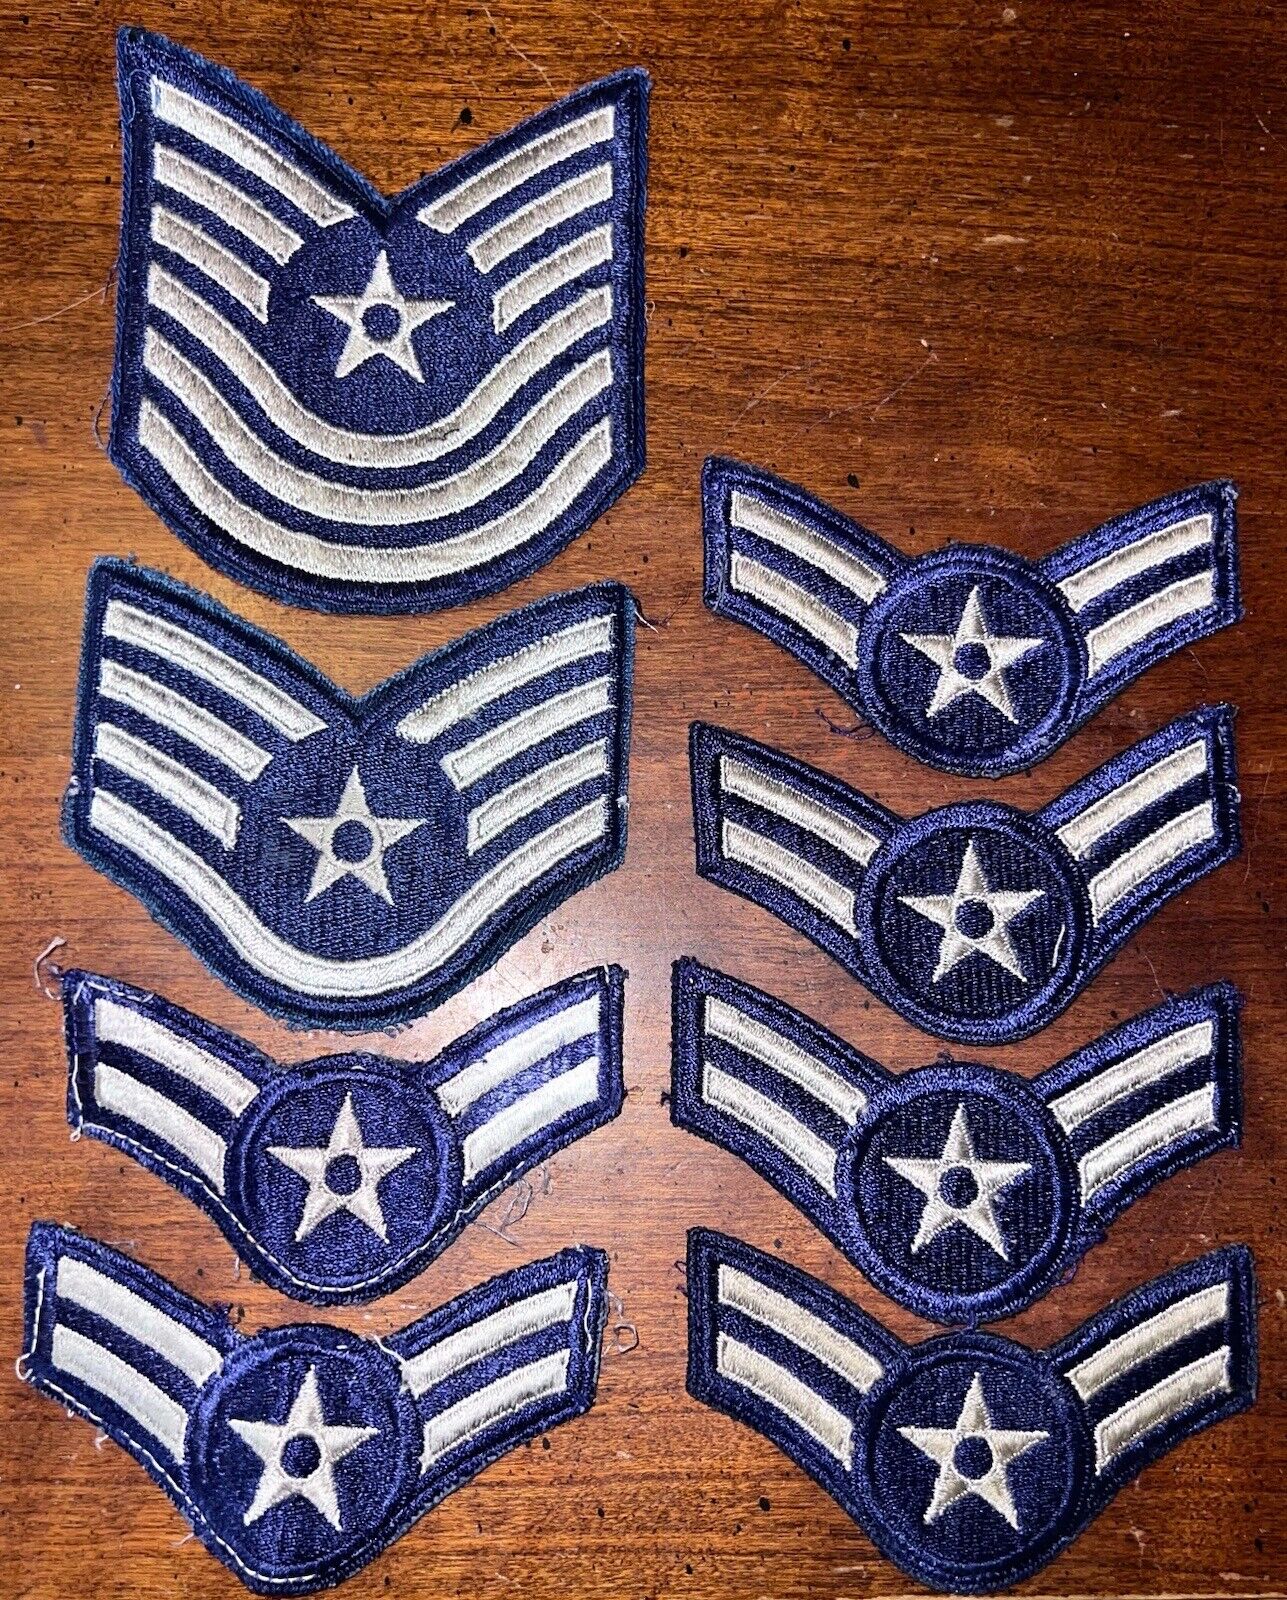 8 Lot WW2 WWII USAF United States Air Force Senior Airman Chevron Military Patch